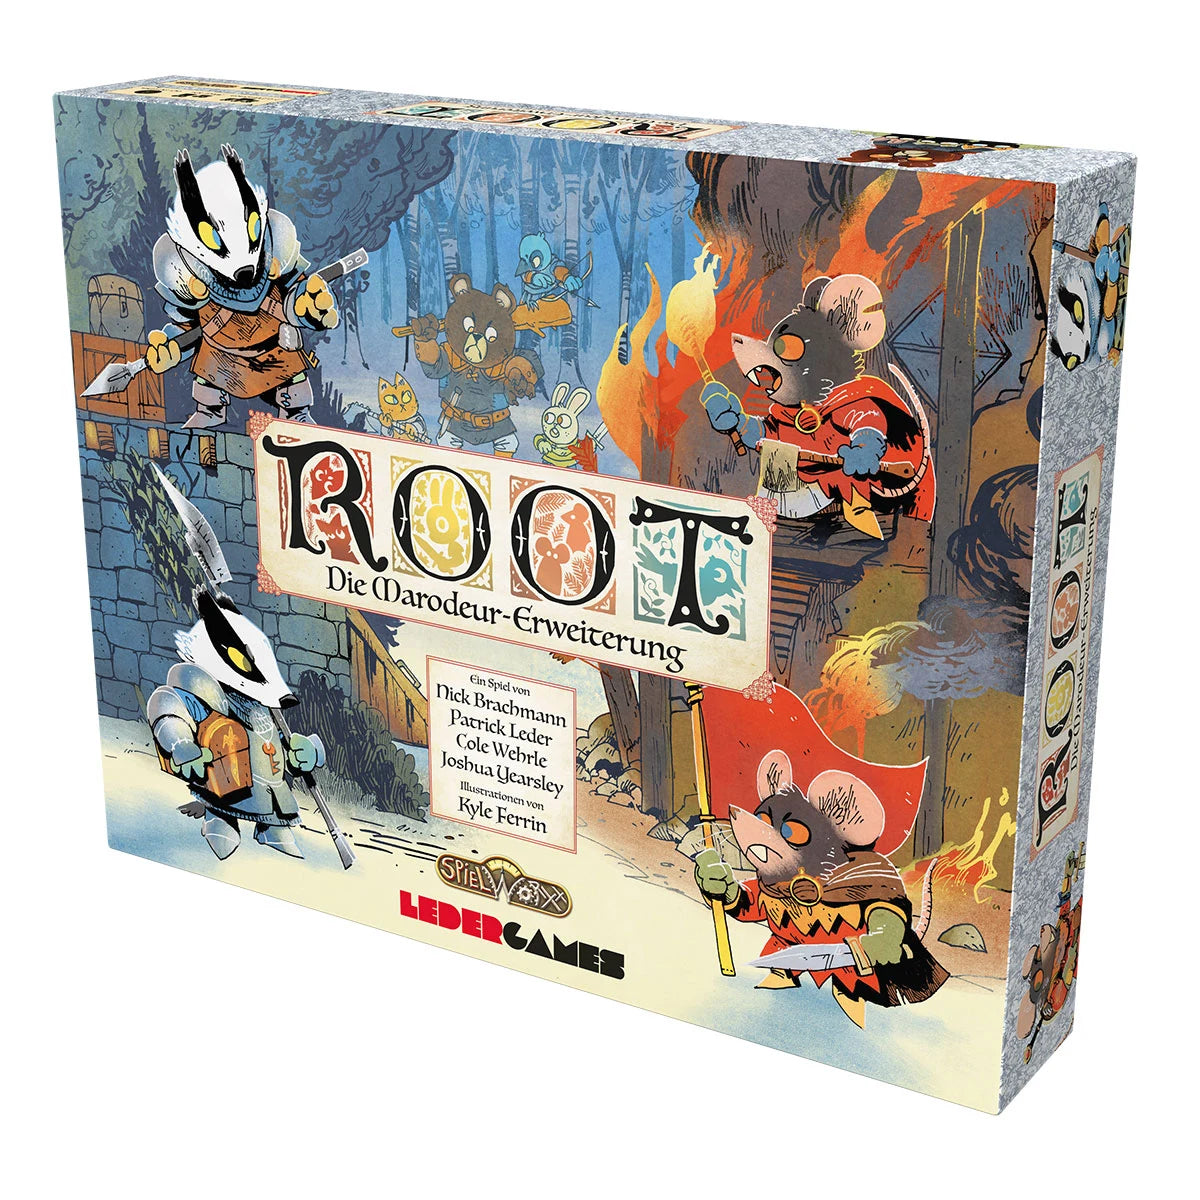 Preorder - Root – The Marauders